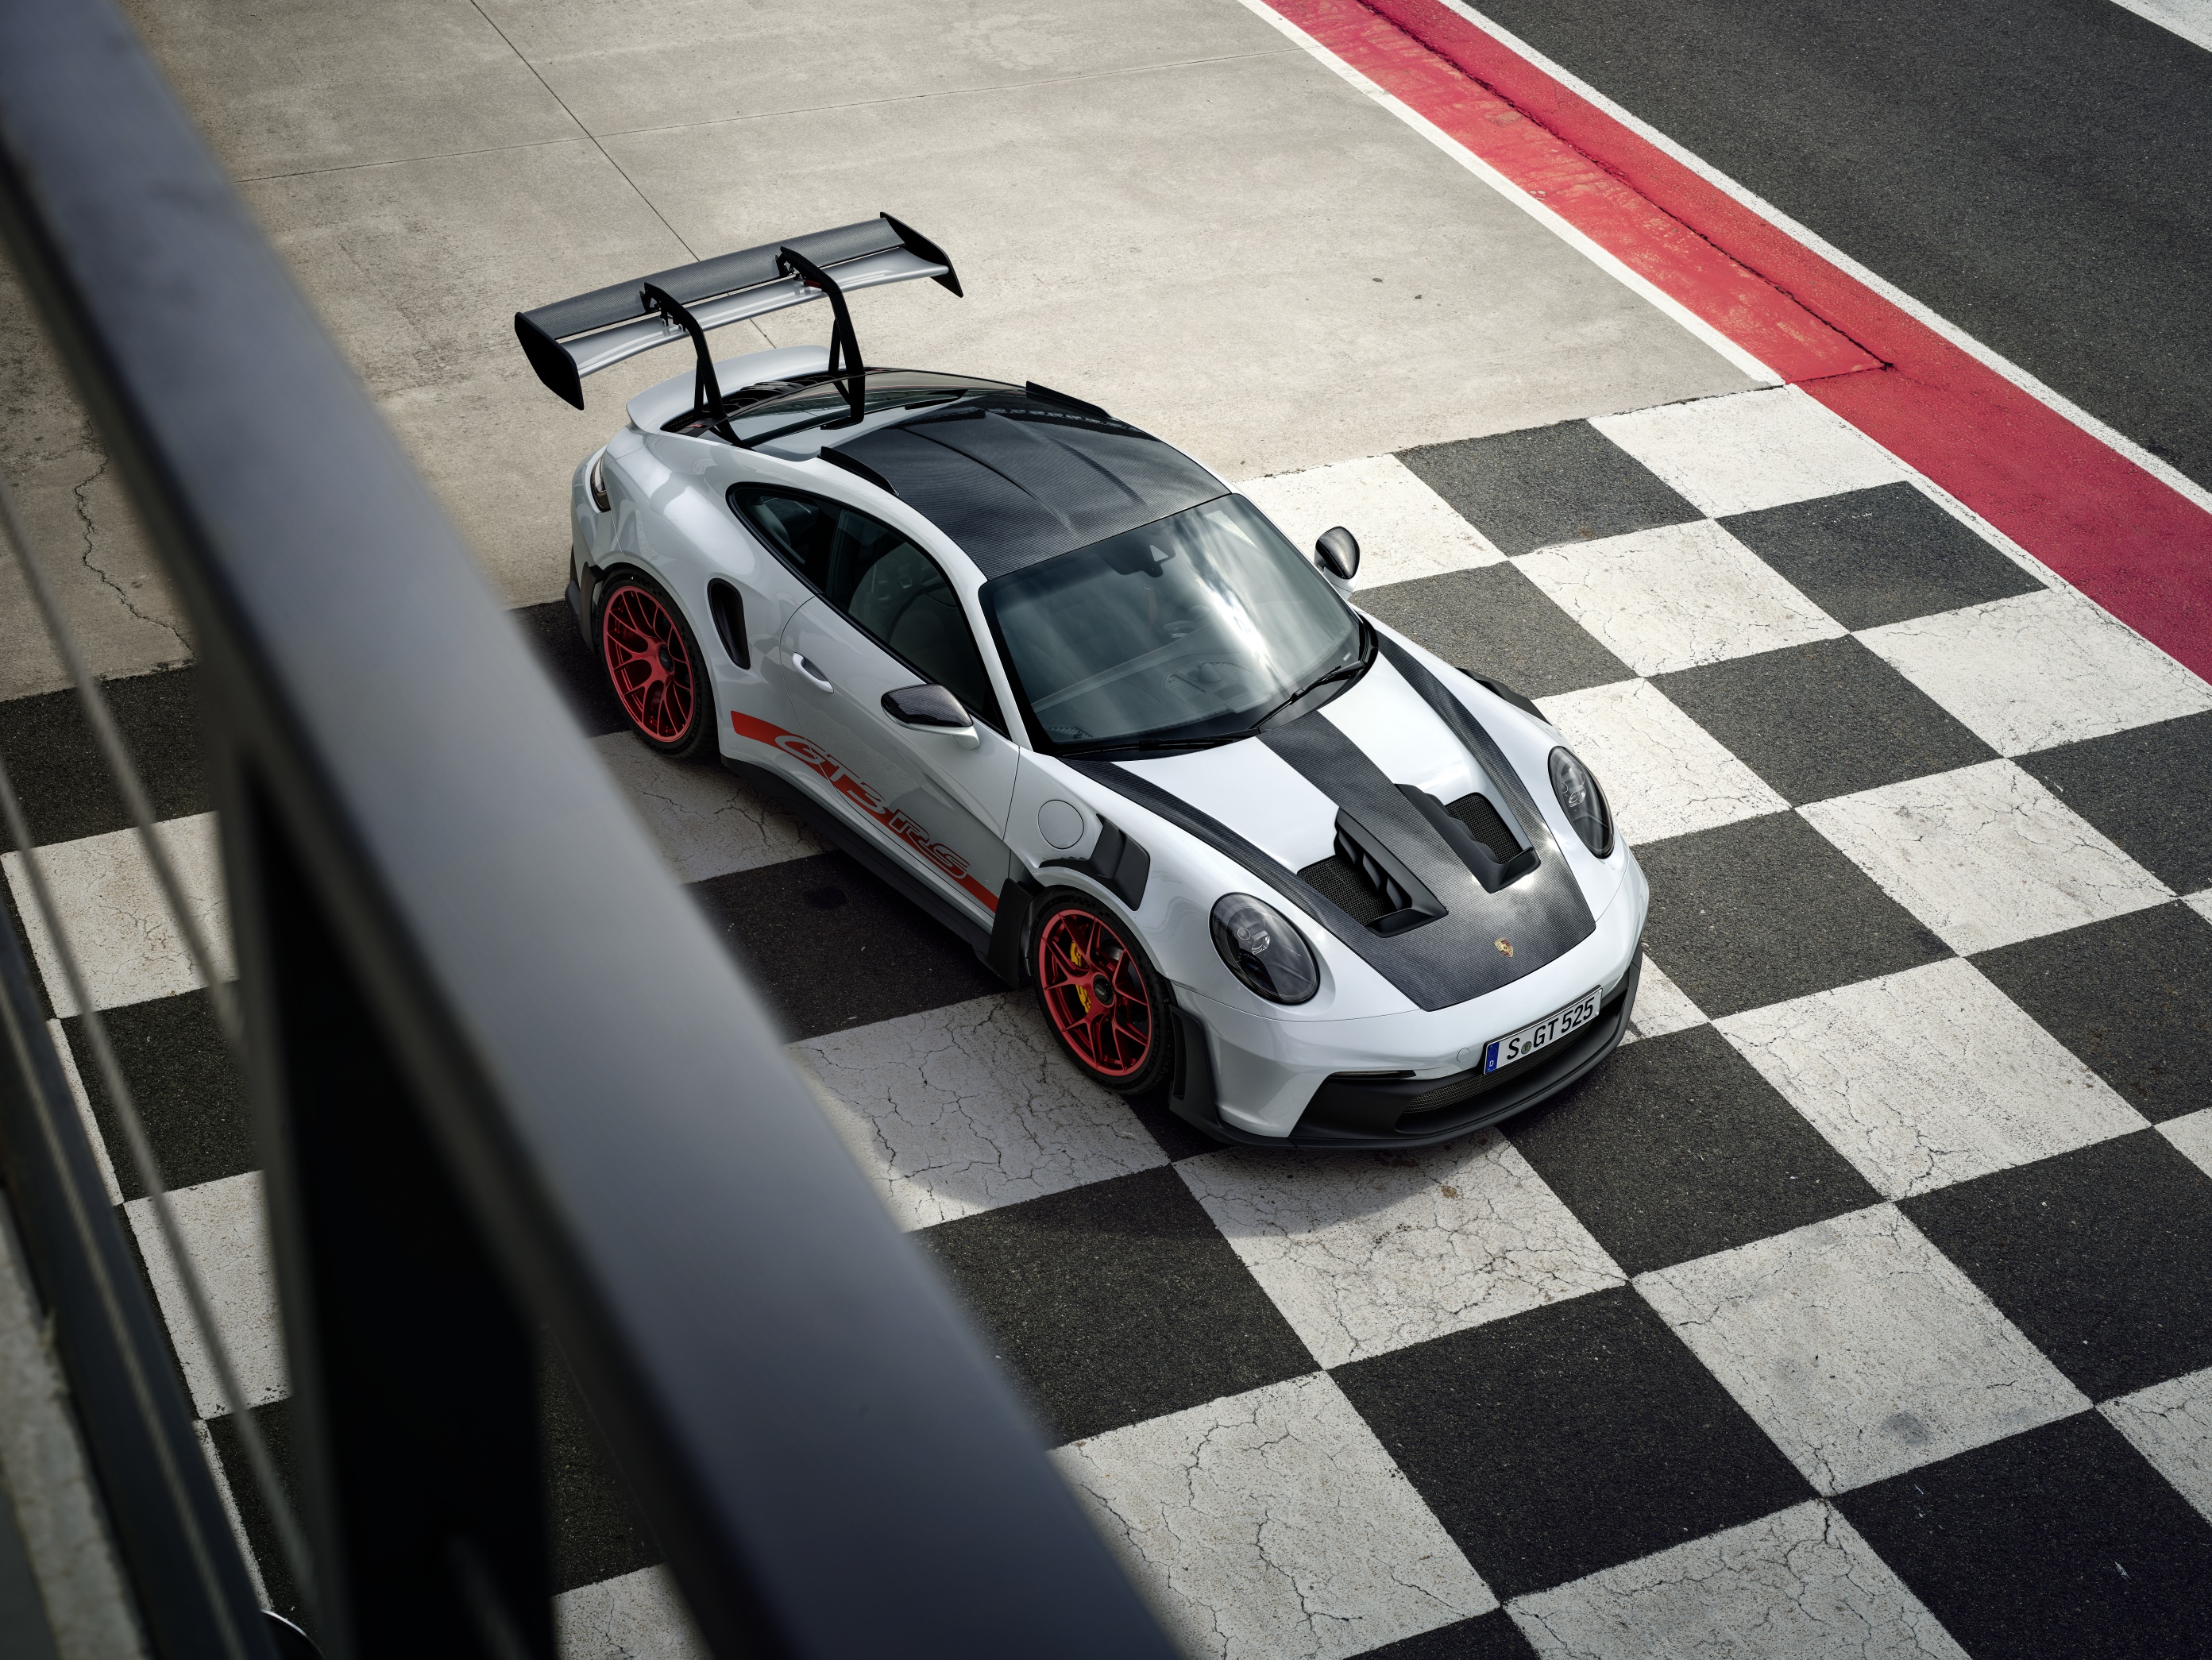 911 GT3 RS on black and white chequered racetrack grid